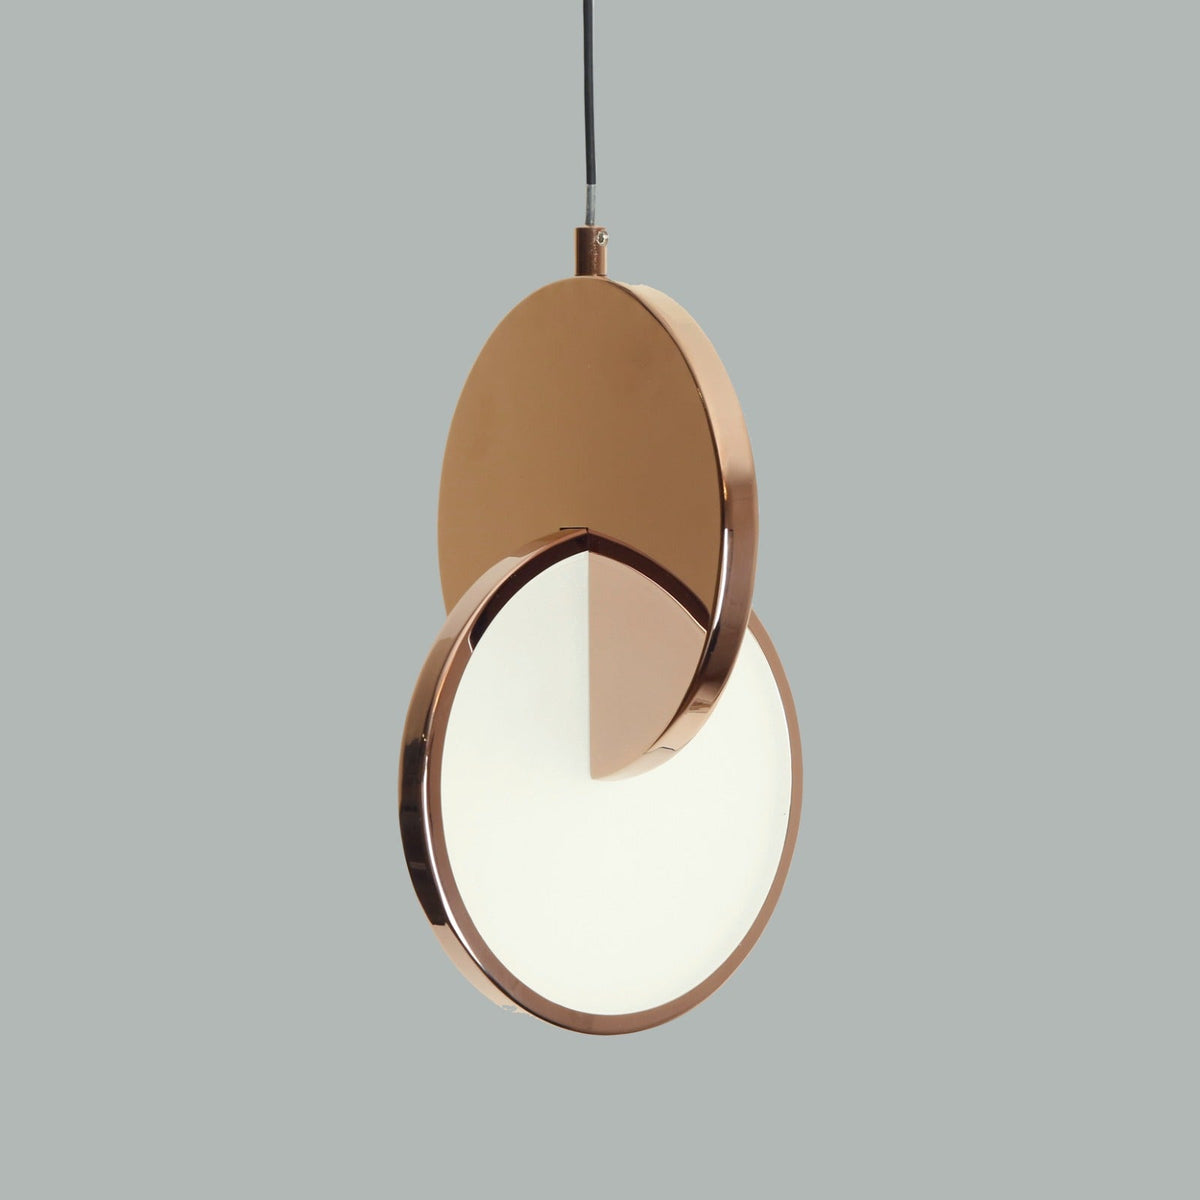 Shop Up in the Air Rose Gold LED Pendant Light online